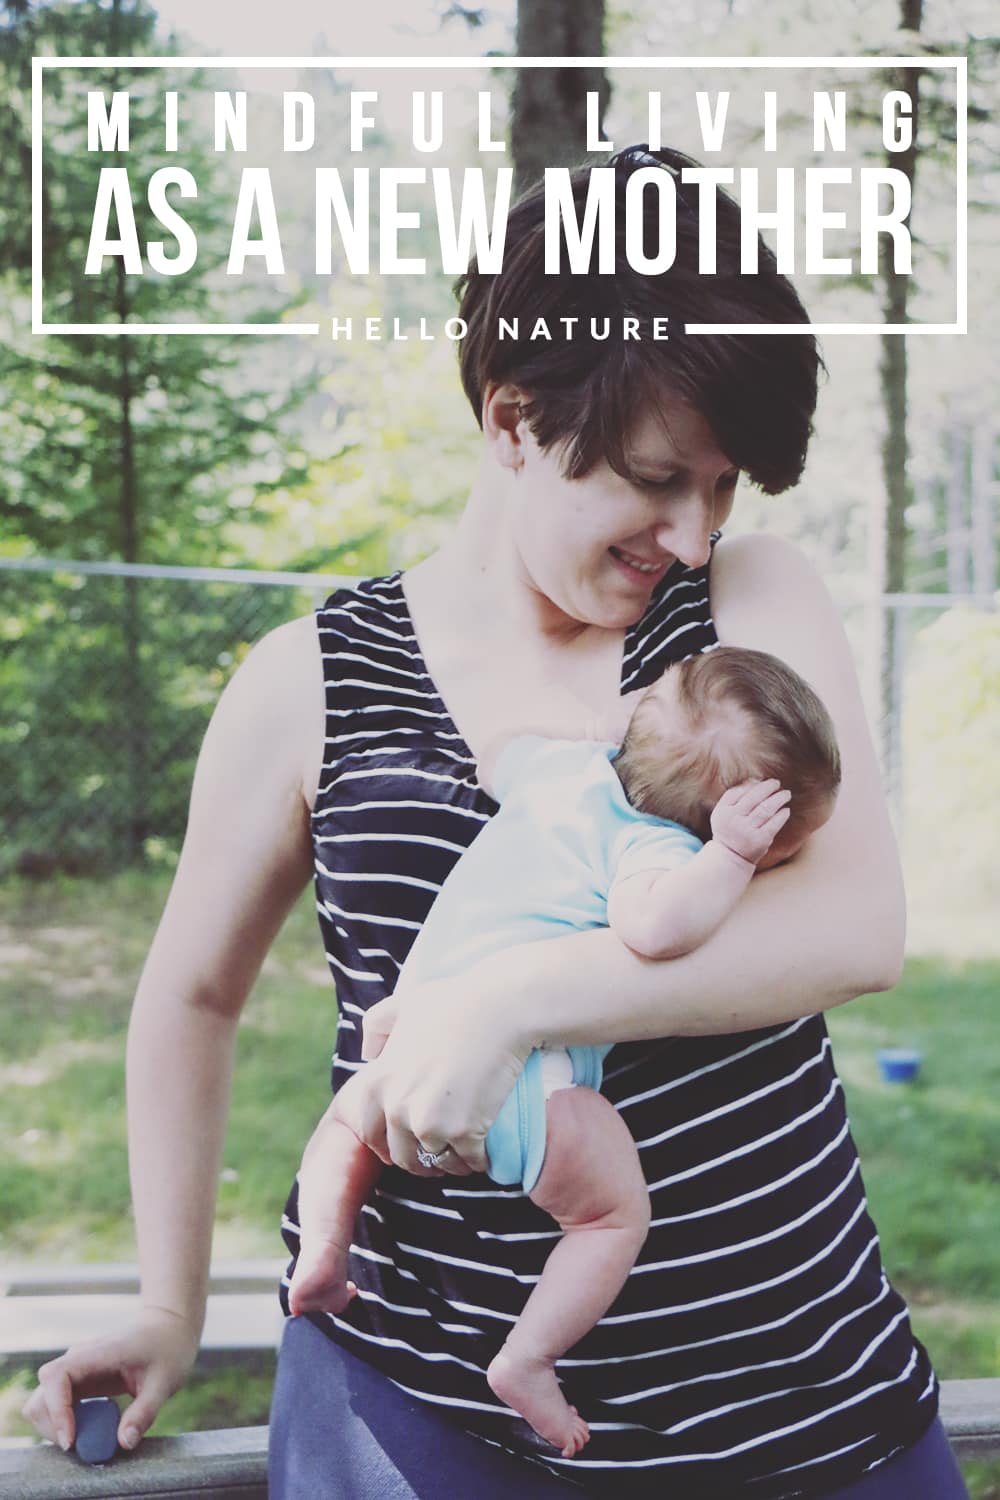 Mindful Living as a New MotherMindful living as a new mother isn't easy. Use these tips to help you live more intentionally as you navigate parenthood.